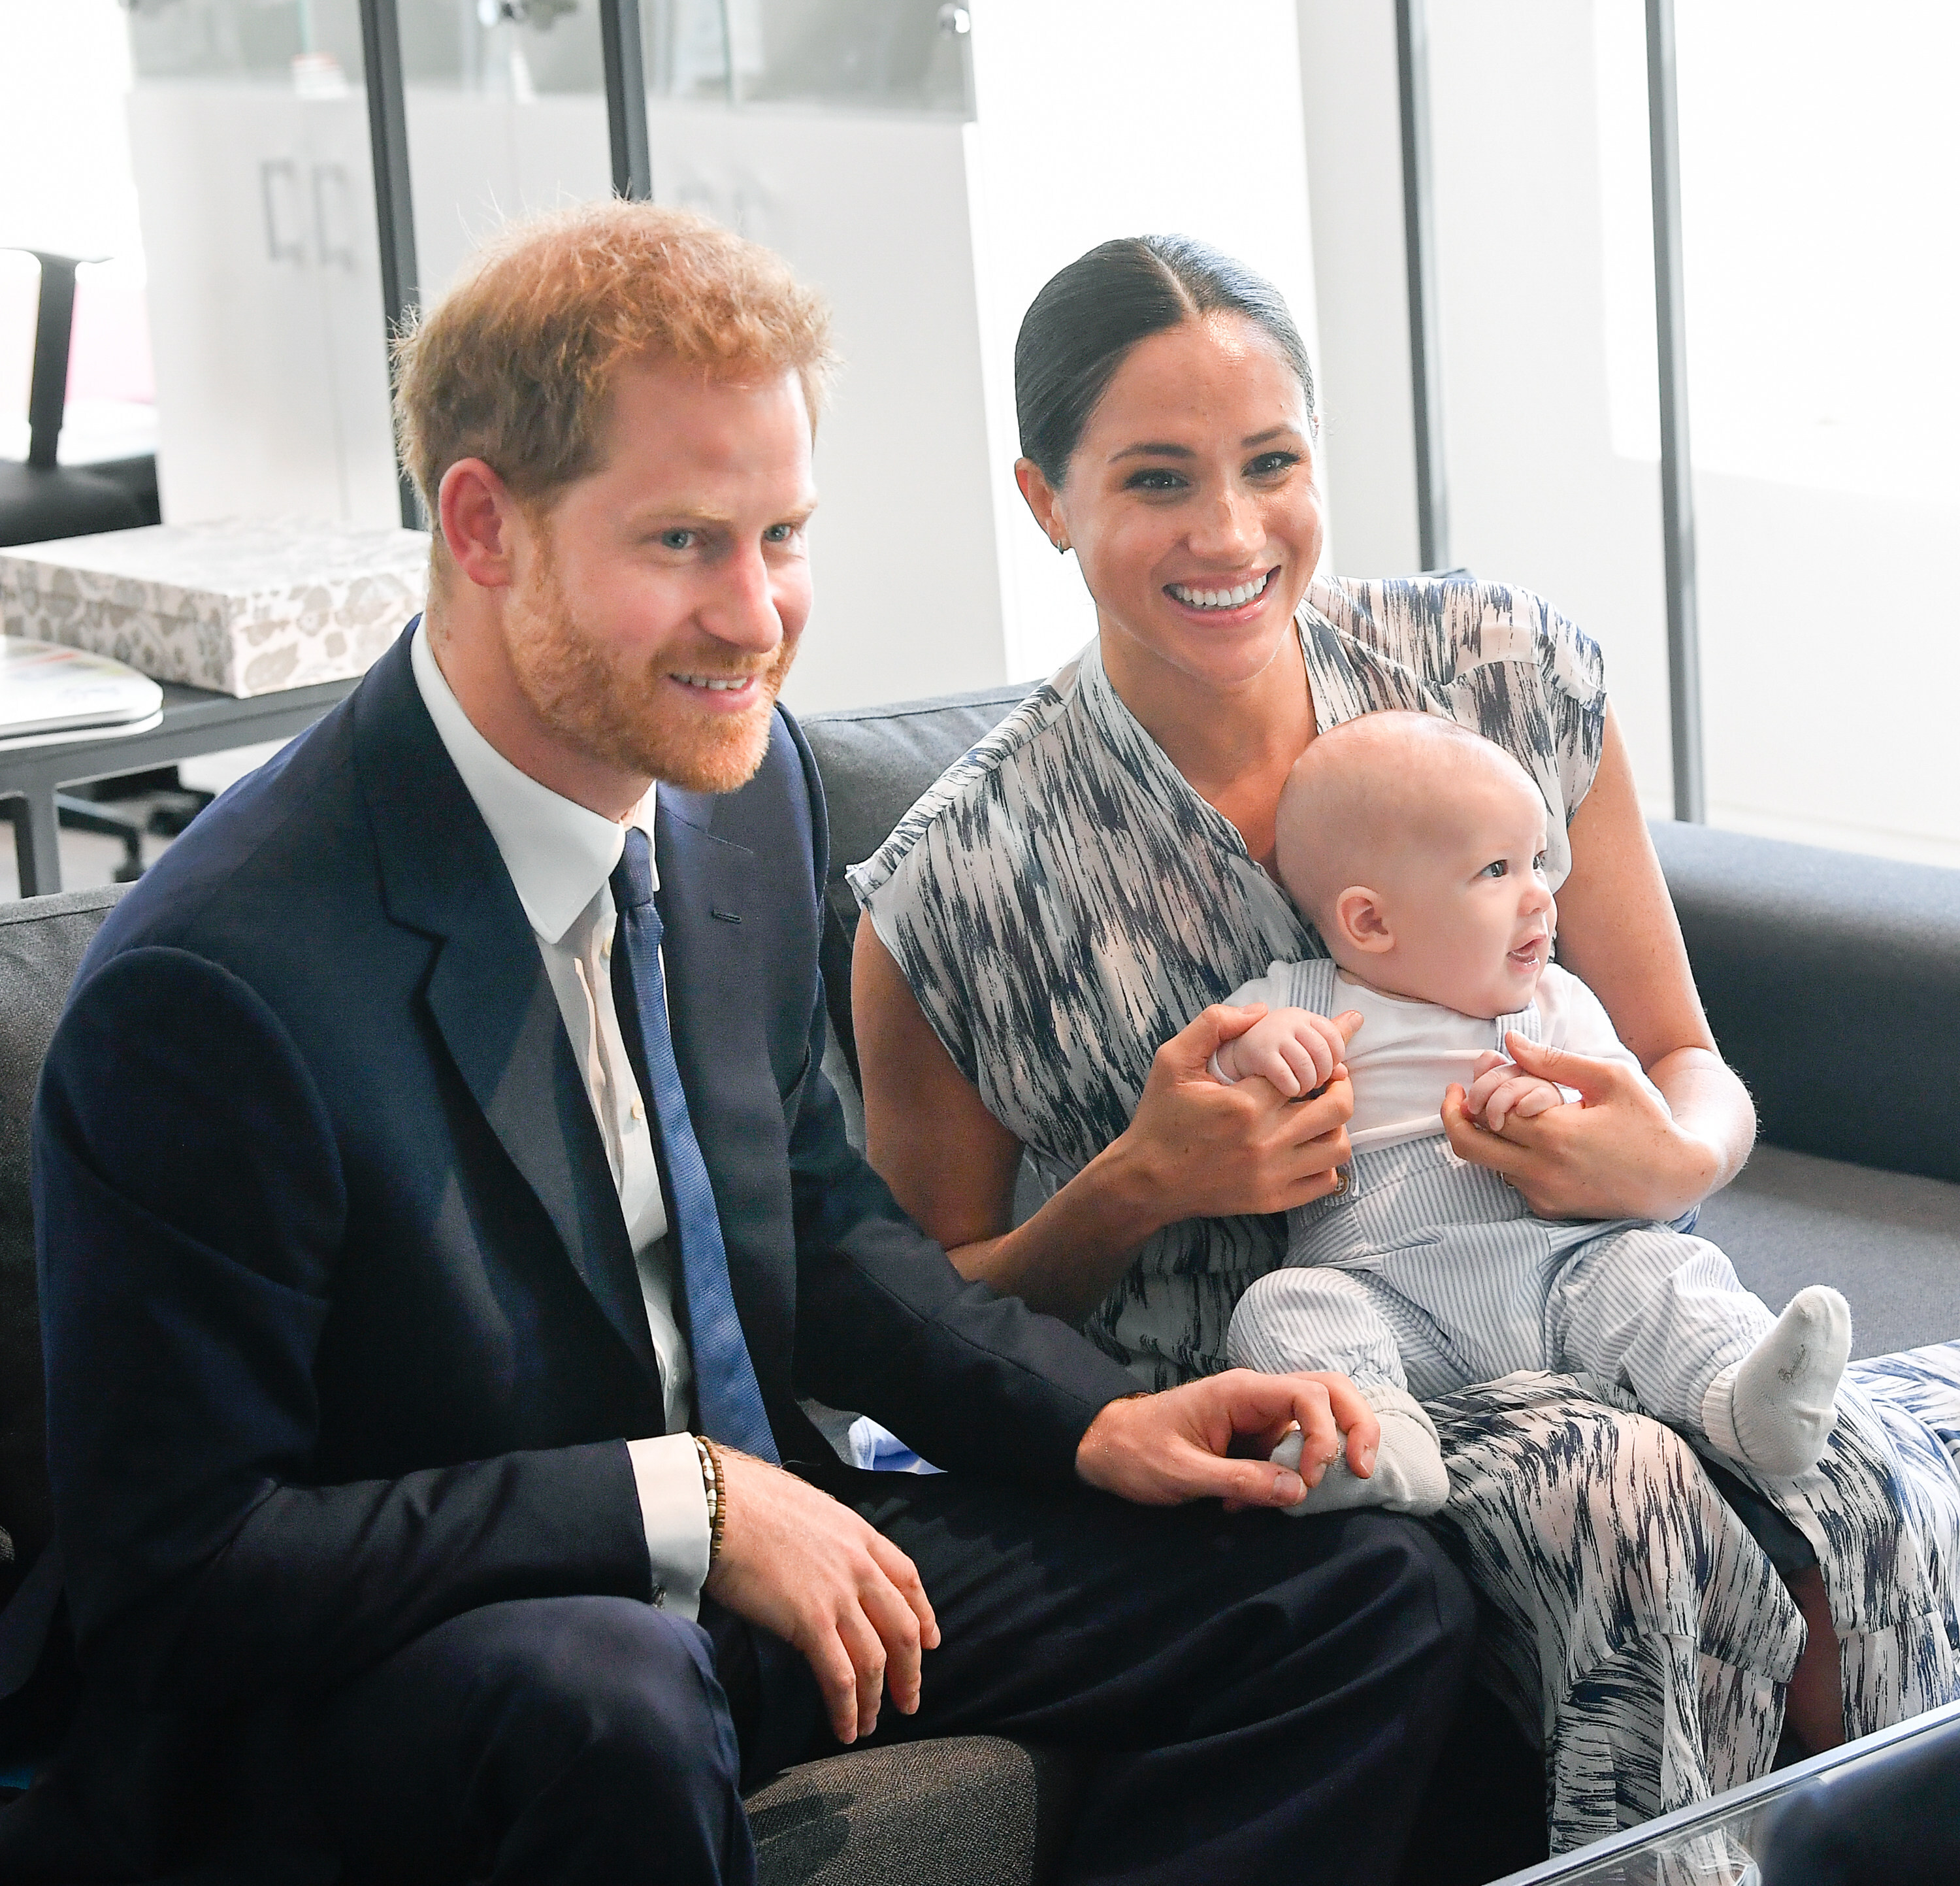 Prince Harry and Meghan Markle with their baby son Archie Mountbatten-Windsor in 2019. The prince has previously spoken about his wish to limit the size of his family. Photo: WireImage